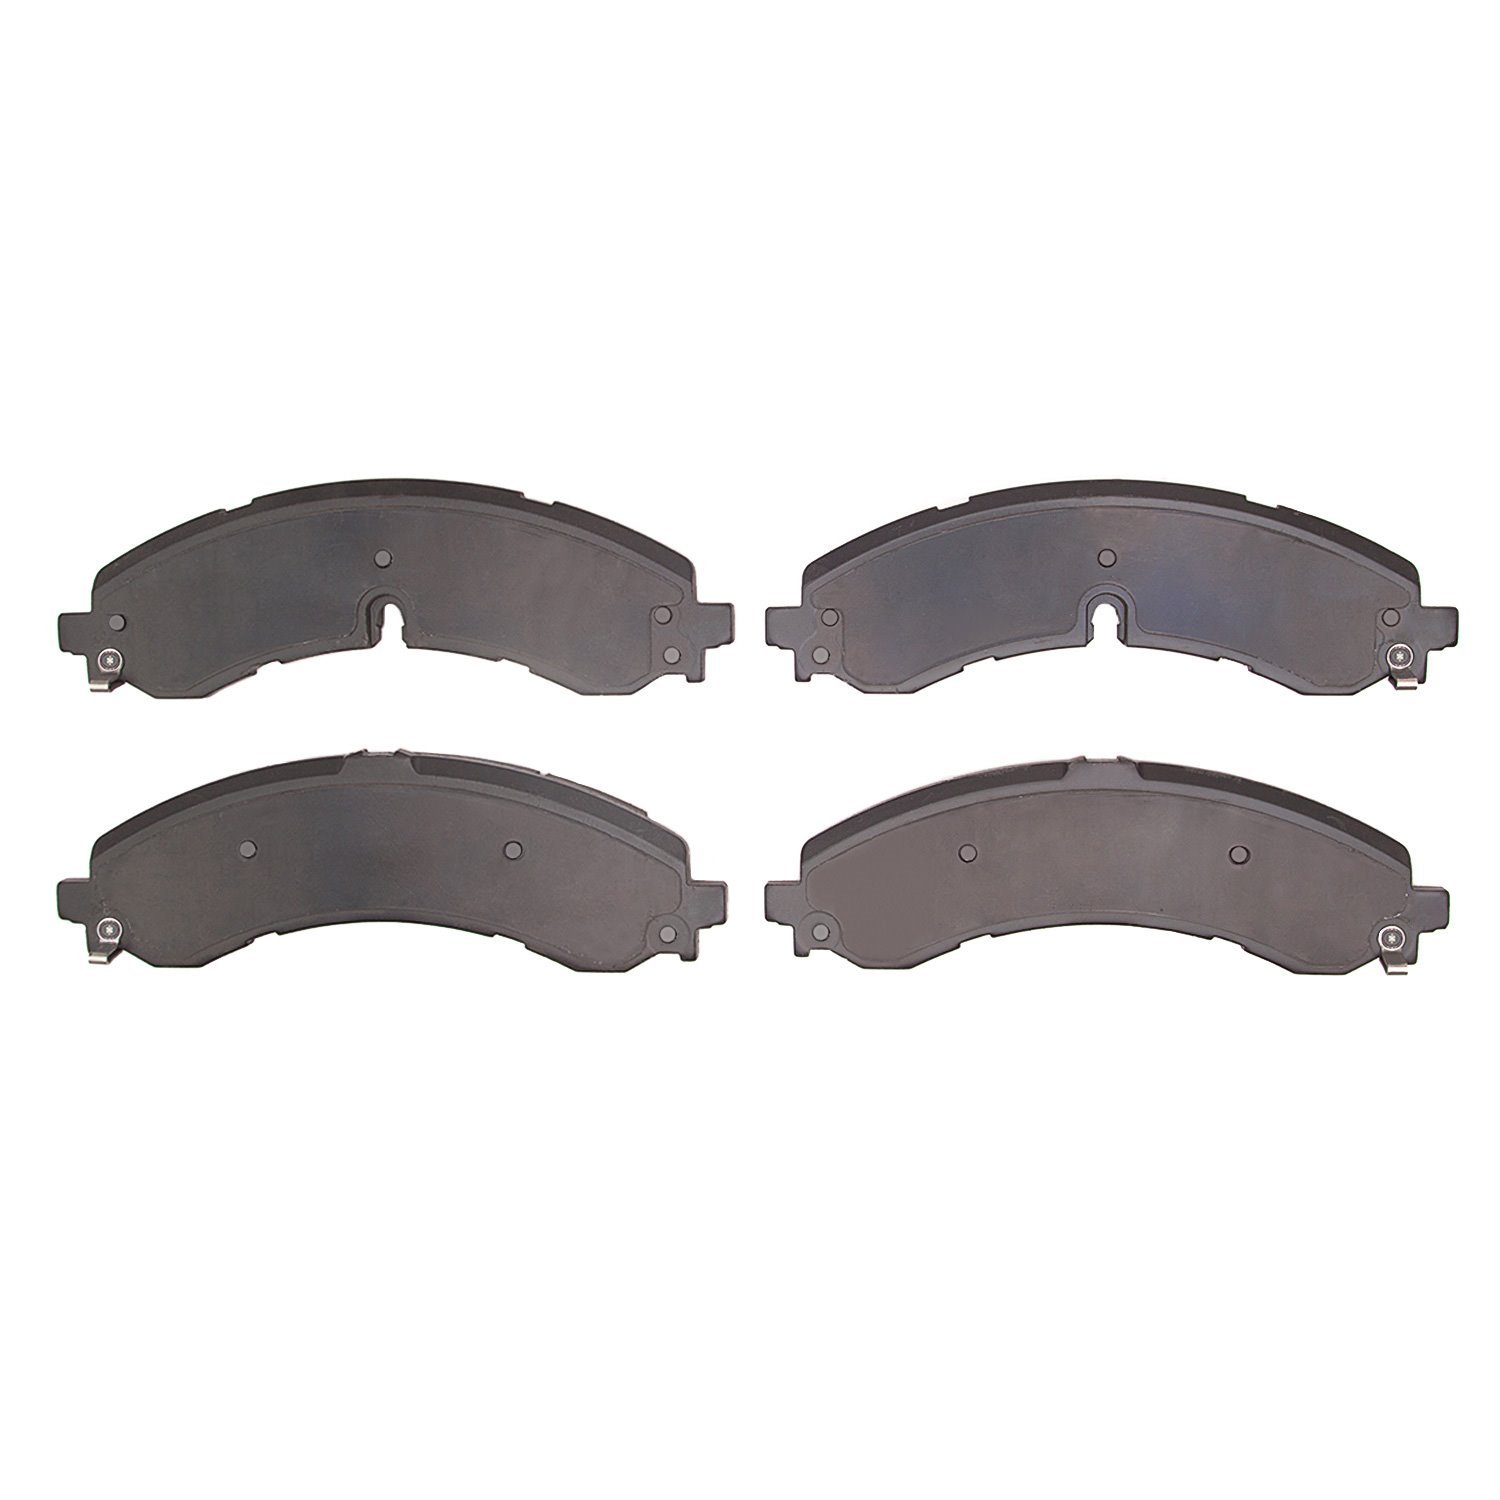 1400-2250-00 Ultimate-Duty Brake Pads Kit, Fits Select GM, Position: Rear,Front